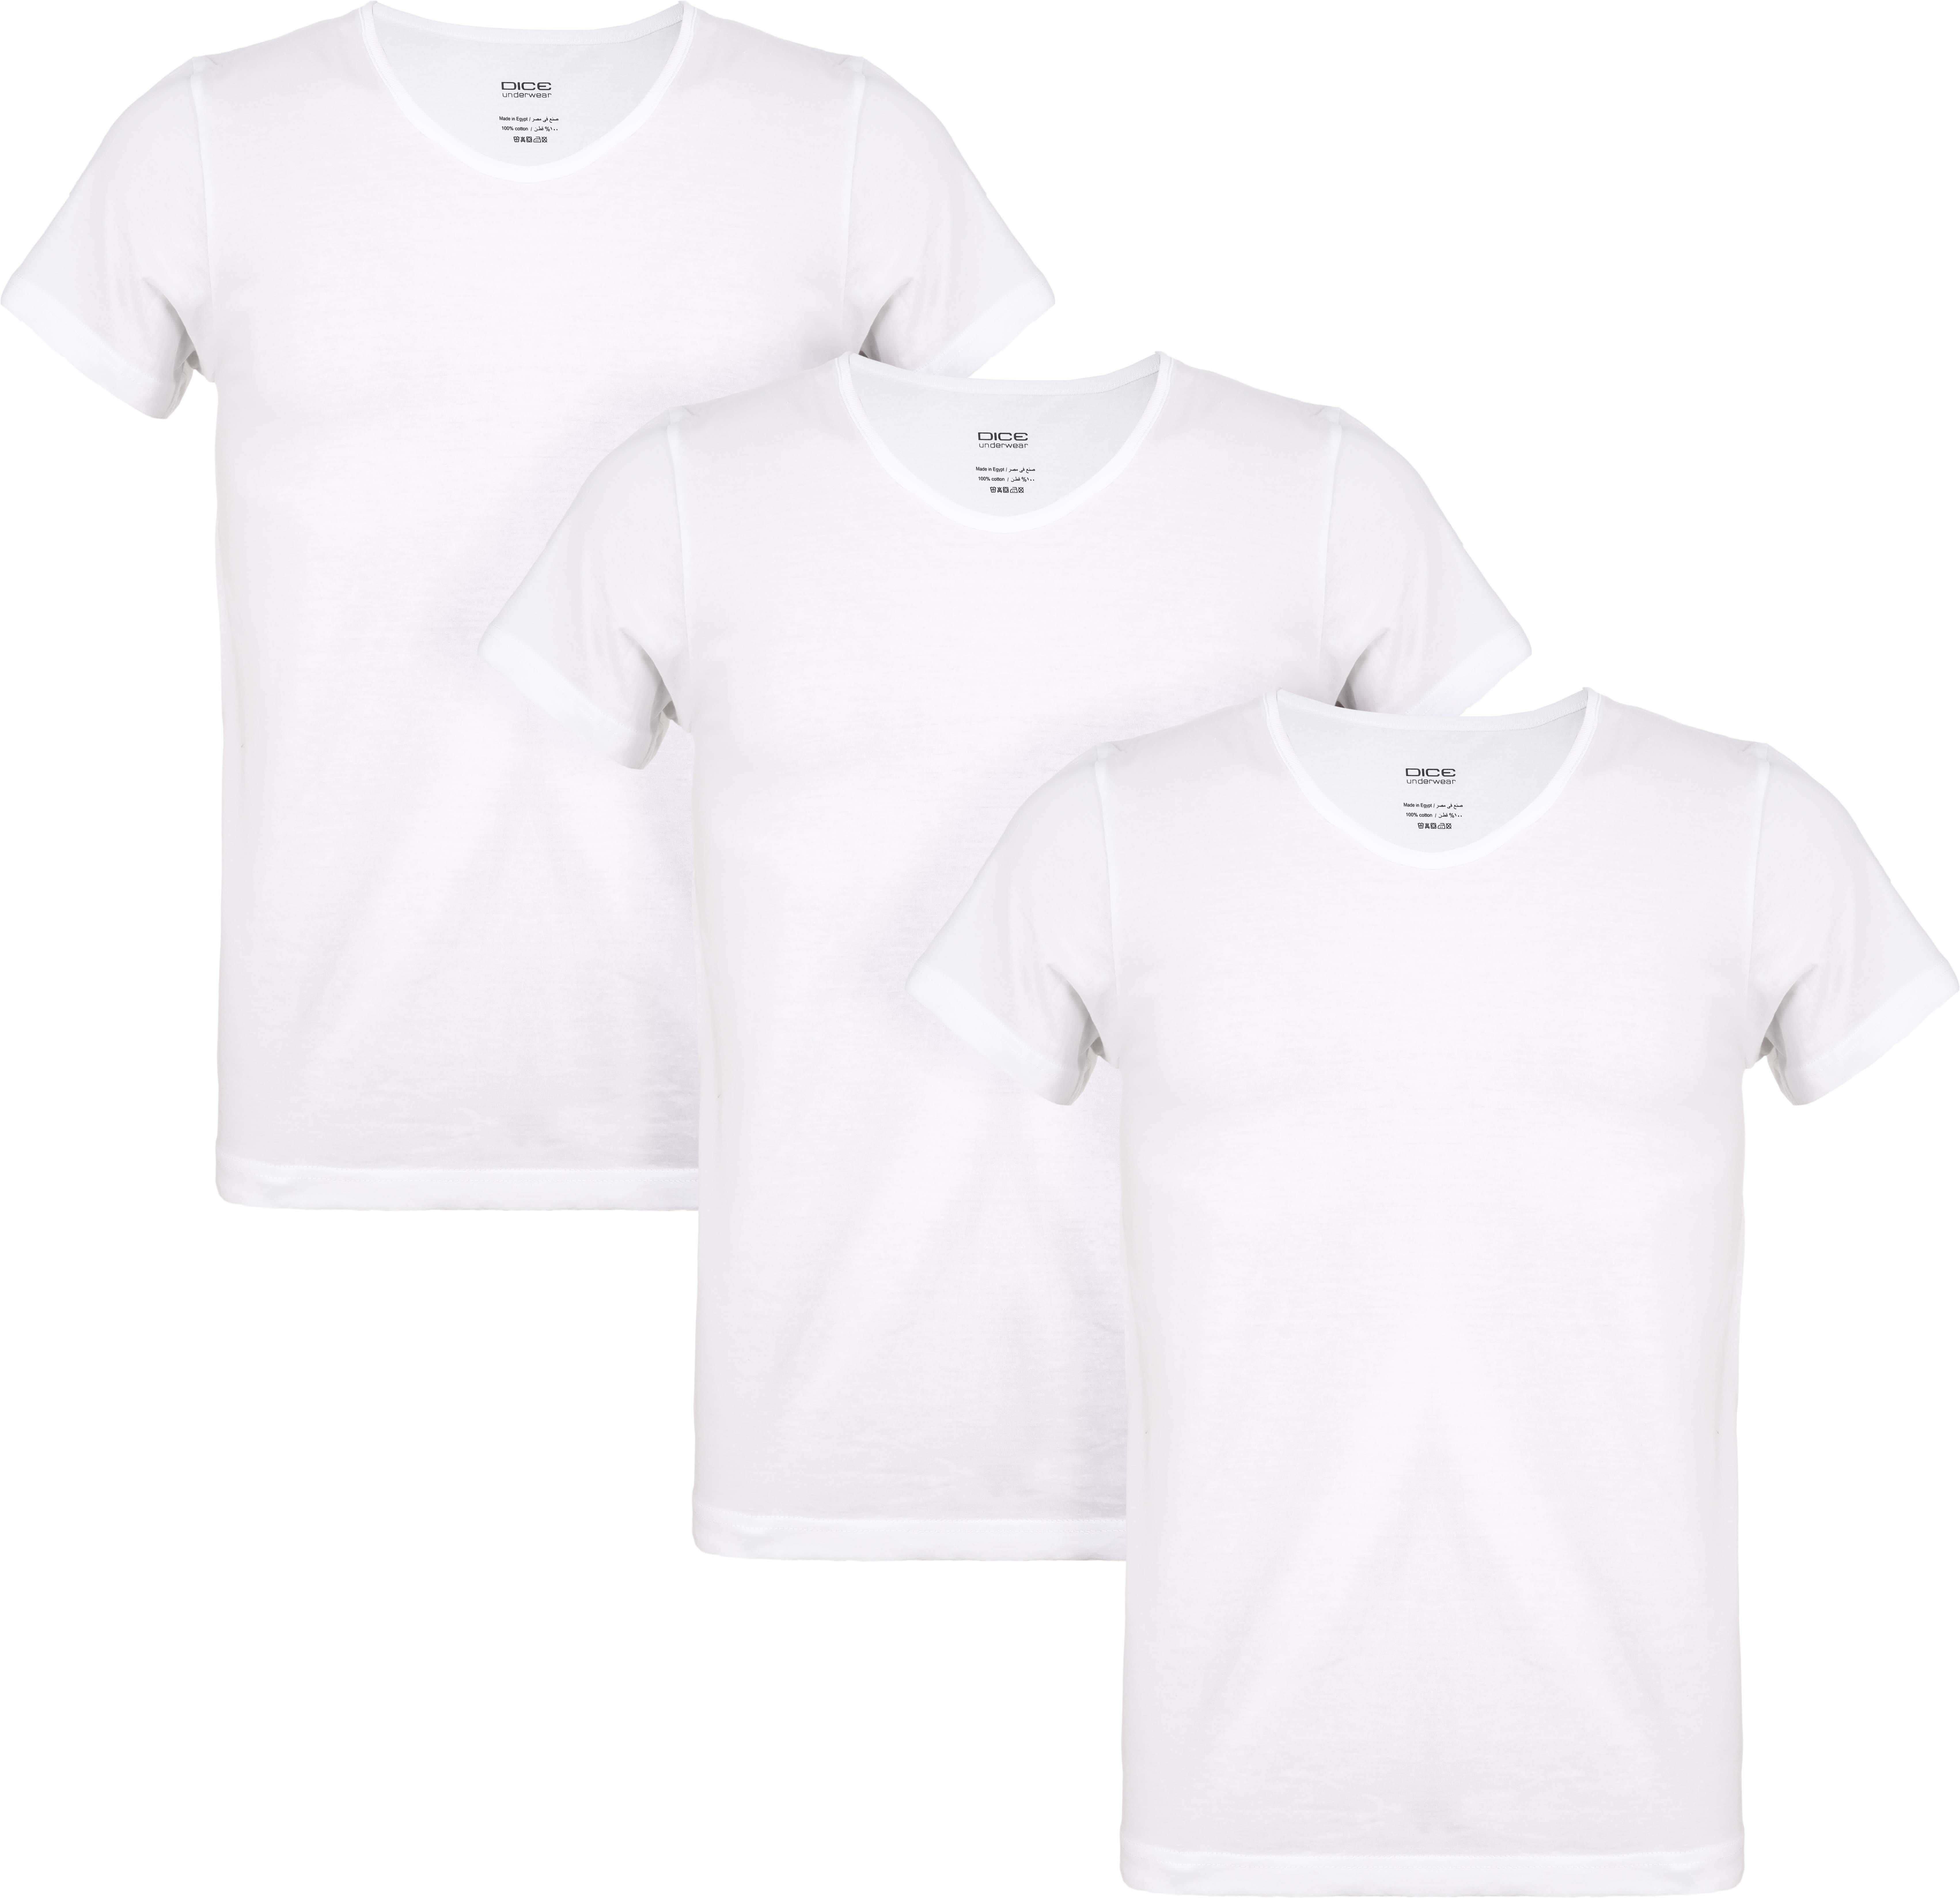 Get Dice Cotton Half Sleeve T-Shirts Set For Men, 3 Pieces, Size L - White with best offers | Raneen.com